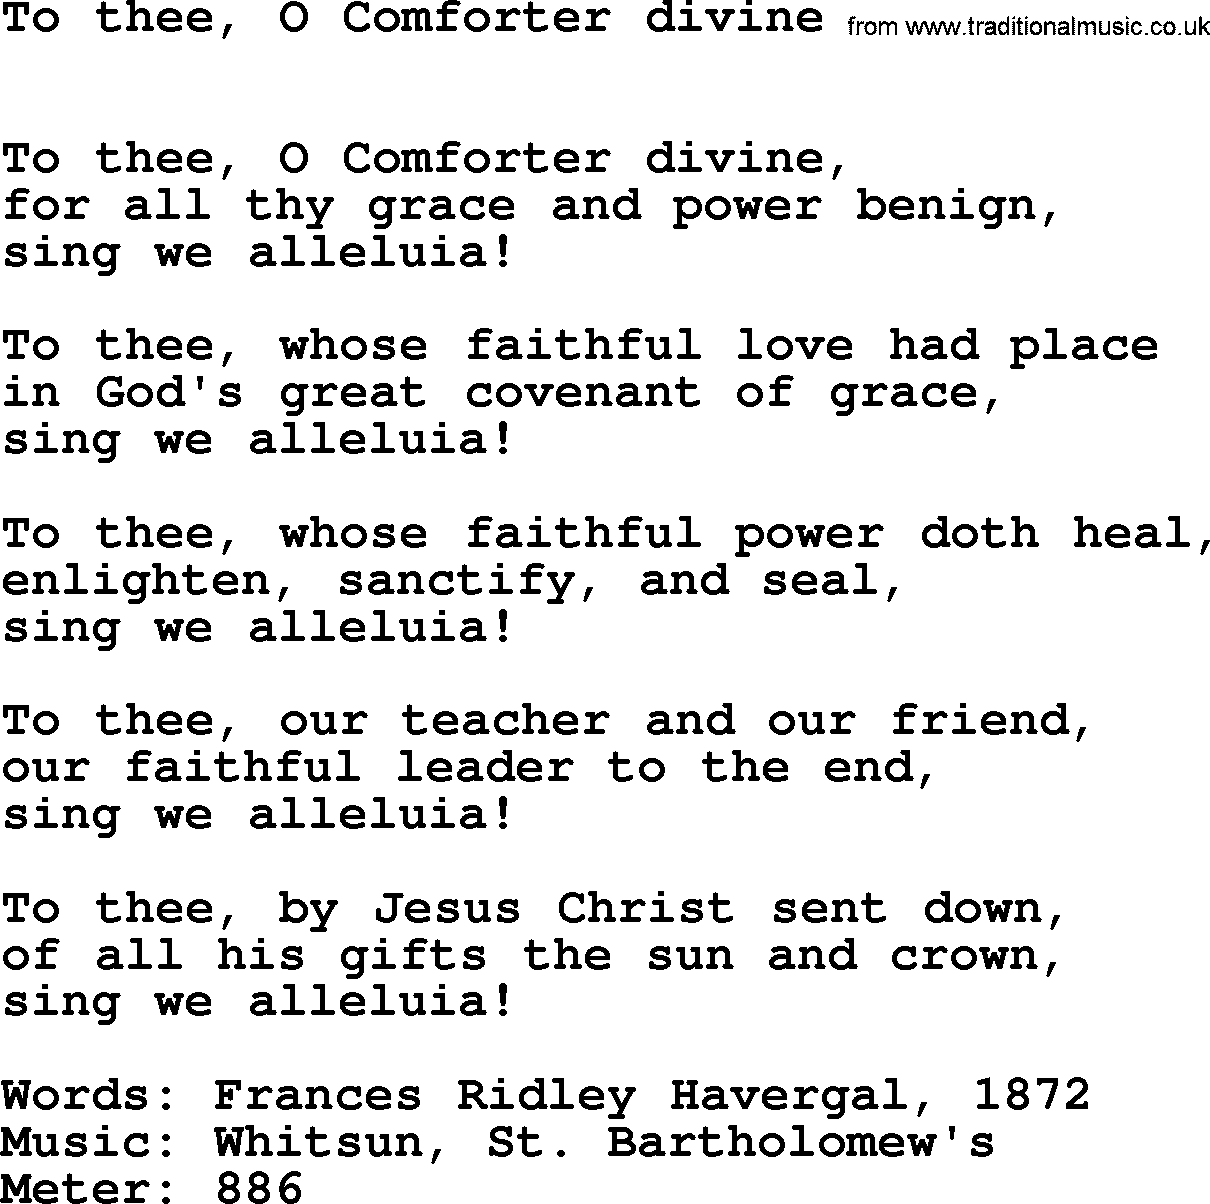 Book of Common Praise Hymn: To Thee, O Comforter Divine.txt lyrics with midi music